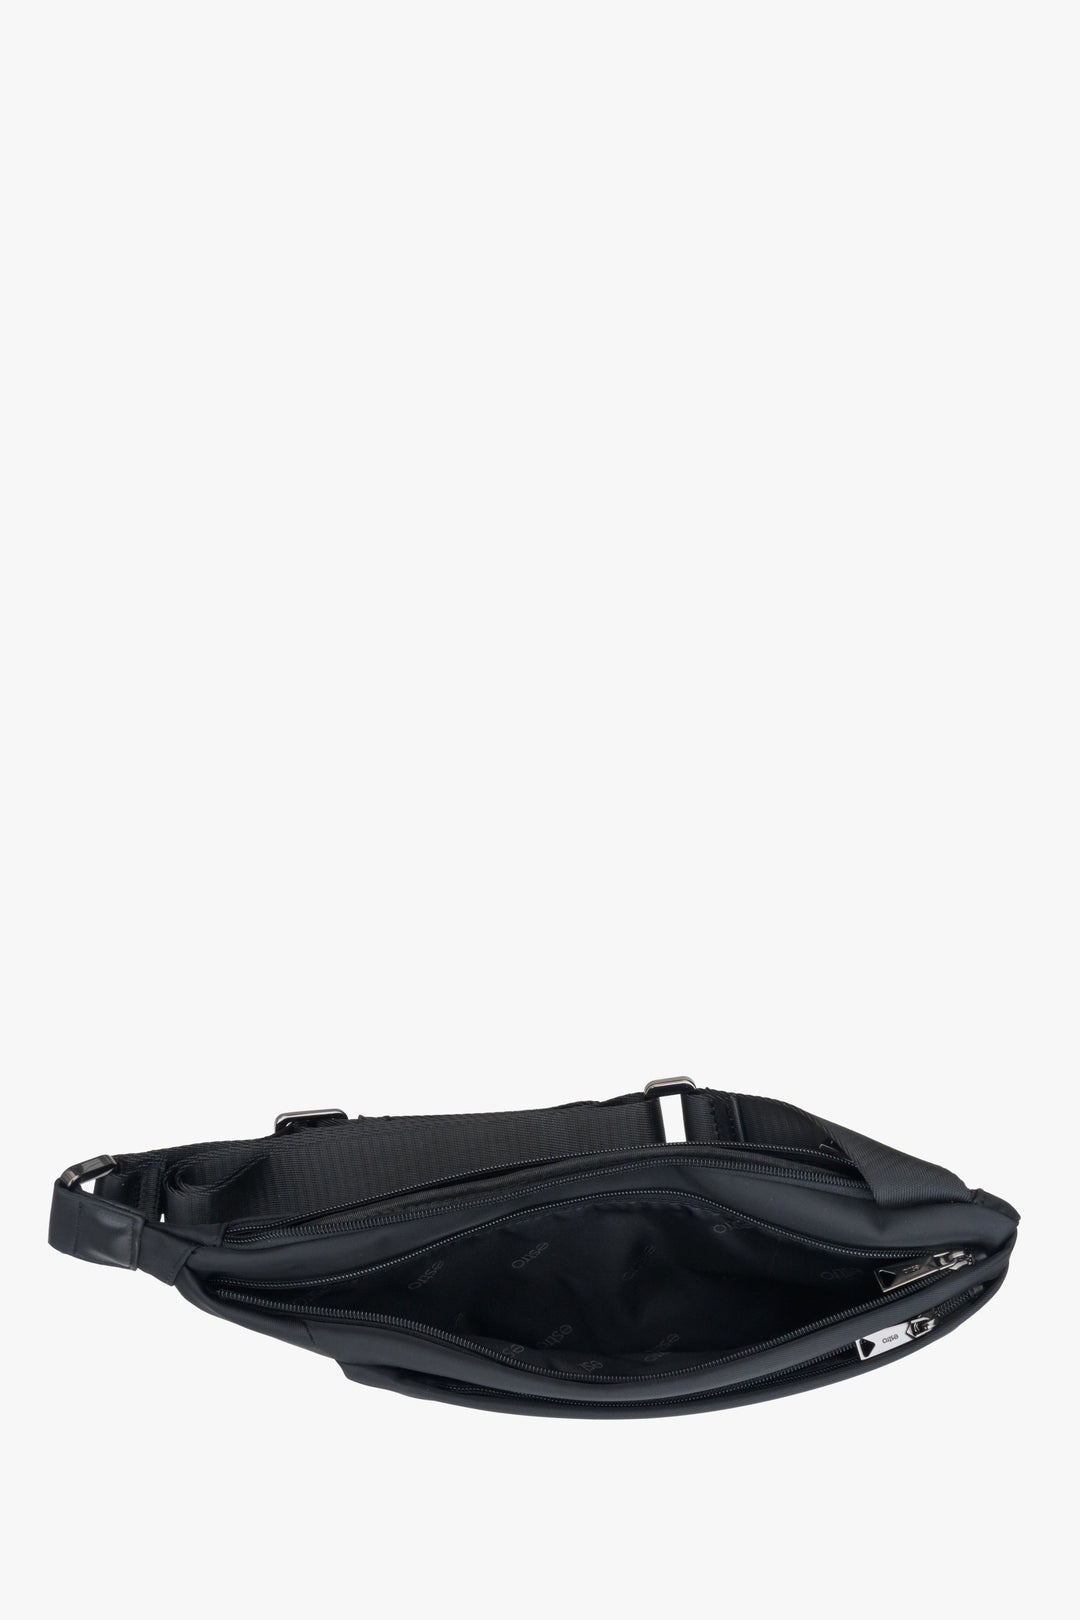 Men's stylish black waist bag with adjustable strap by Estro - close-up on the interior.